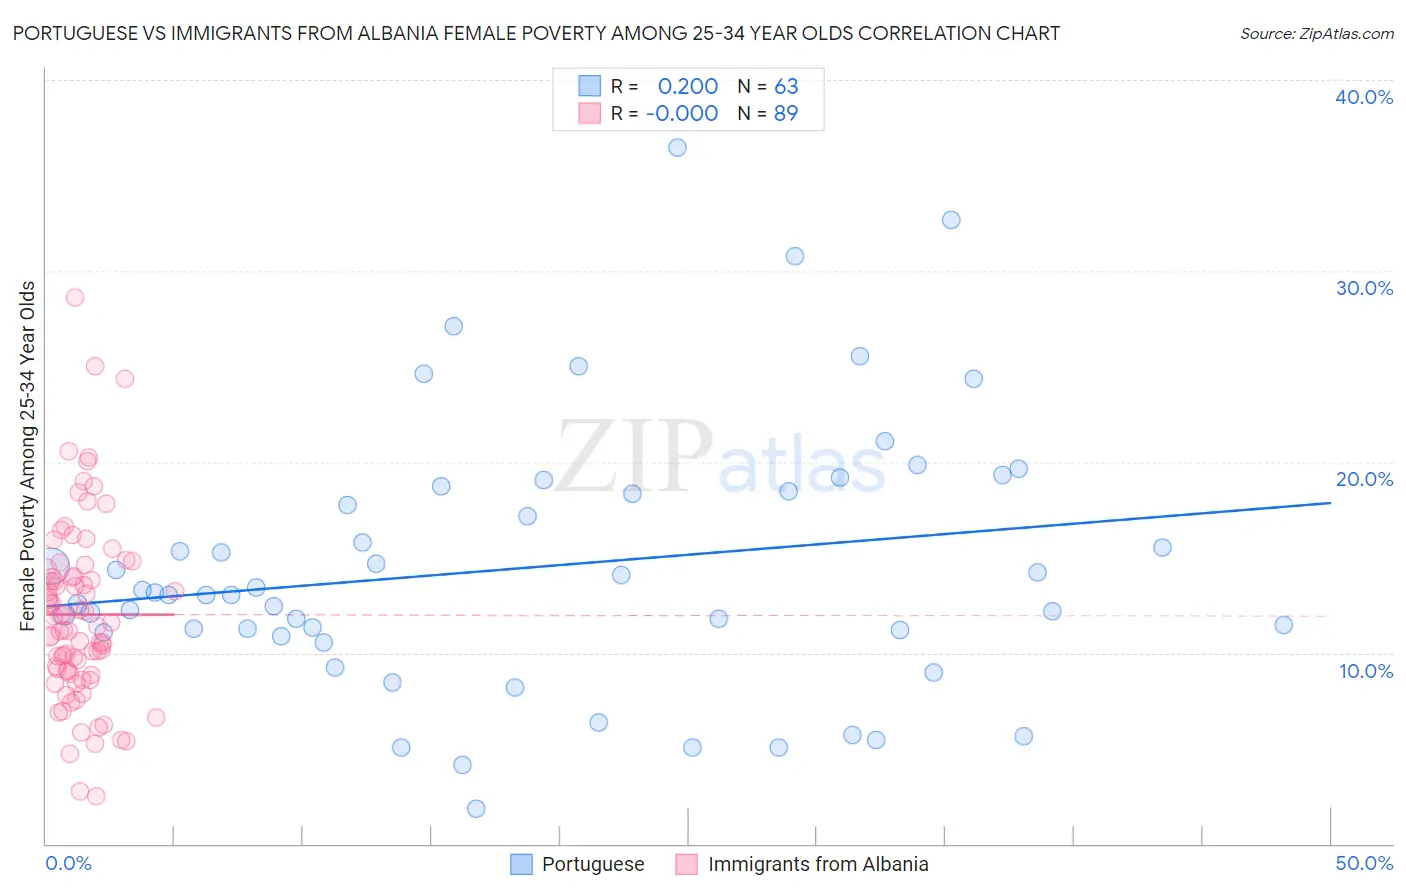 Portuguese vs Immigrants from Albania Female Poverty Among 25-34 Year Olds